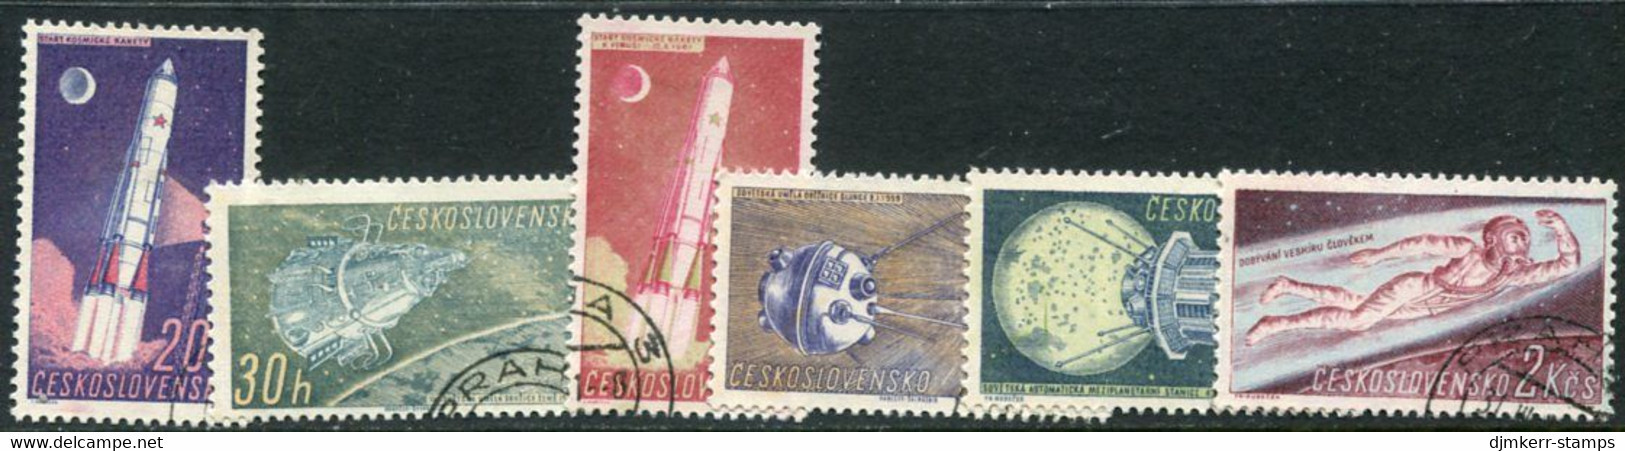 CZECHOSLOVAKIA 1961 Space Exploration Used.  Michel 1252-57 - Used Stamps